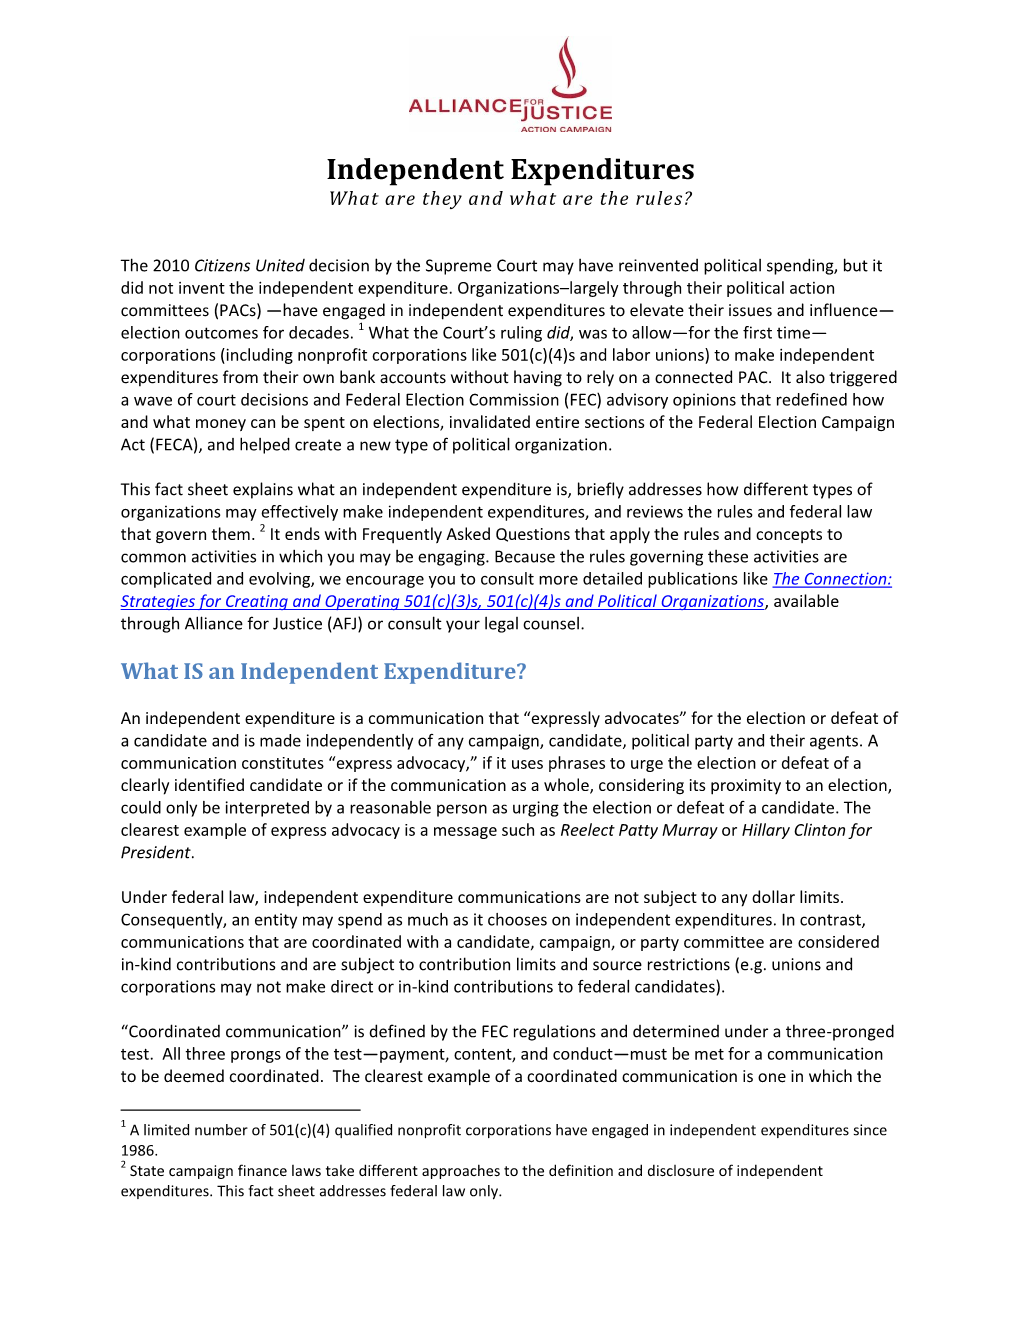 Independent Expenditures What Are They and What Are the Rules?